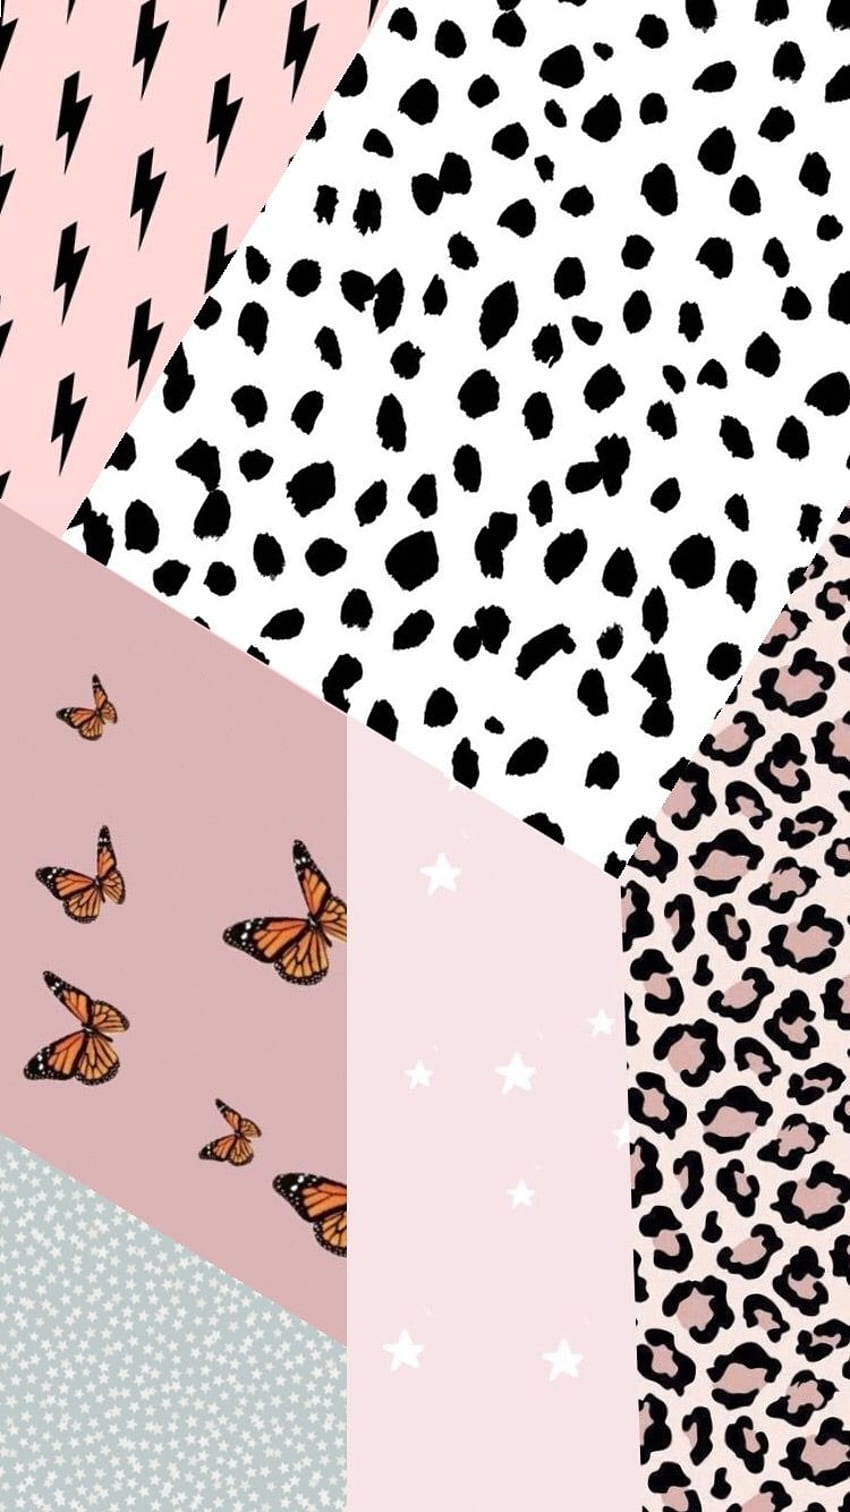 Wallpaper for phone girly, pink background, with black and white patterns, and butterflies - VSCO